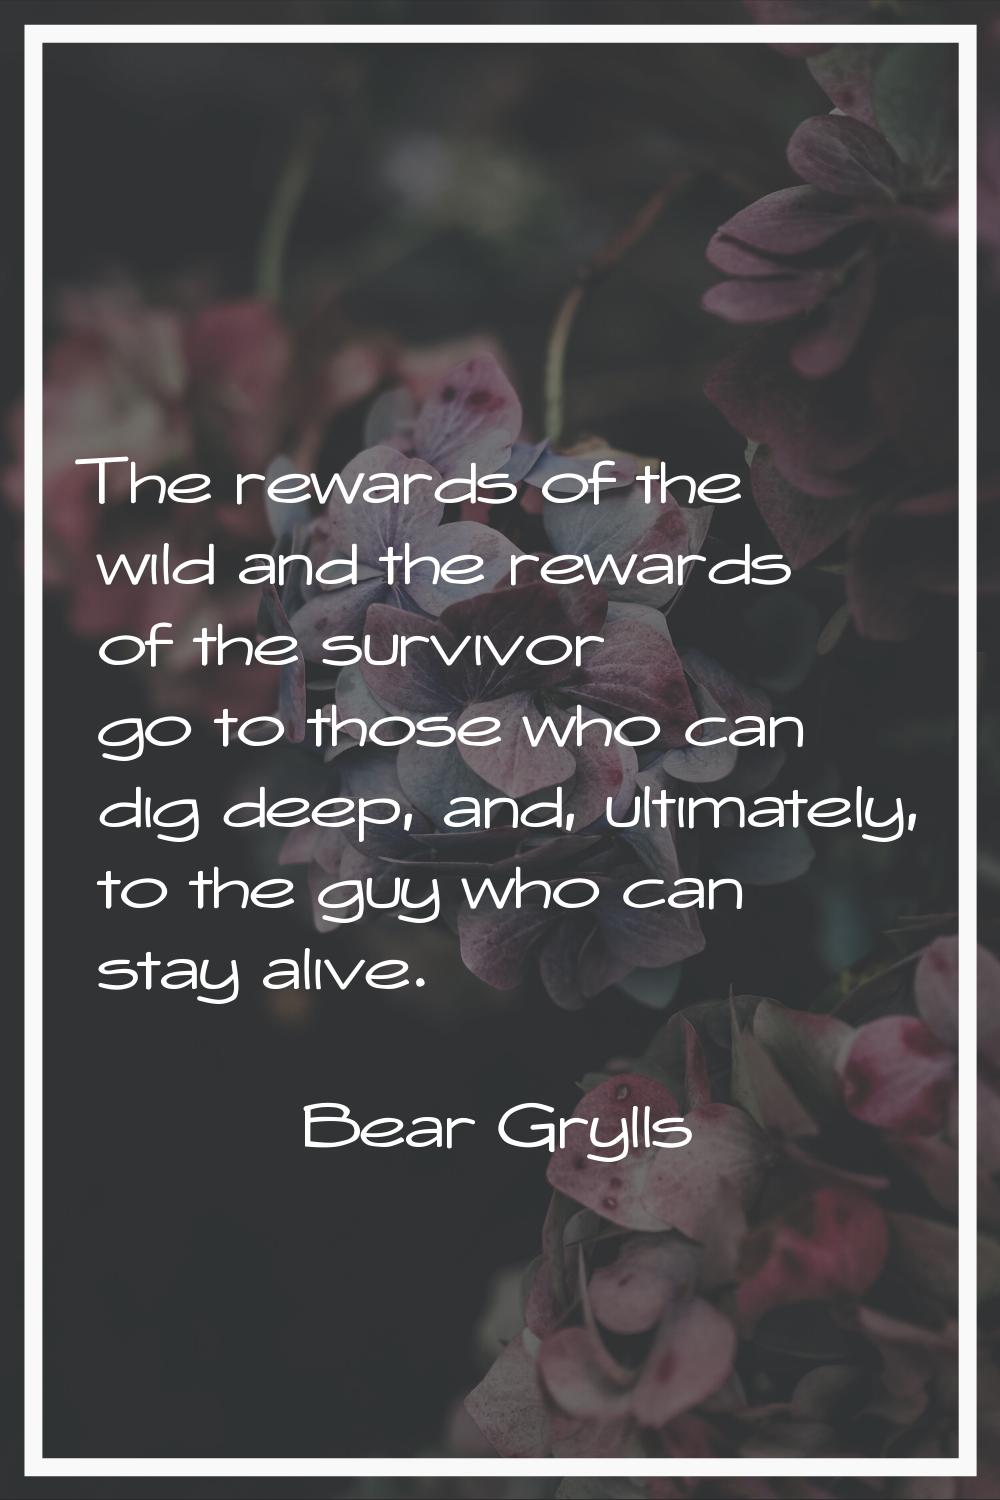 The rewards of the wild and the rewards of the survivor go to those who can dig deep, and, ultimate